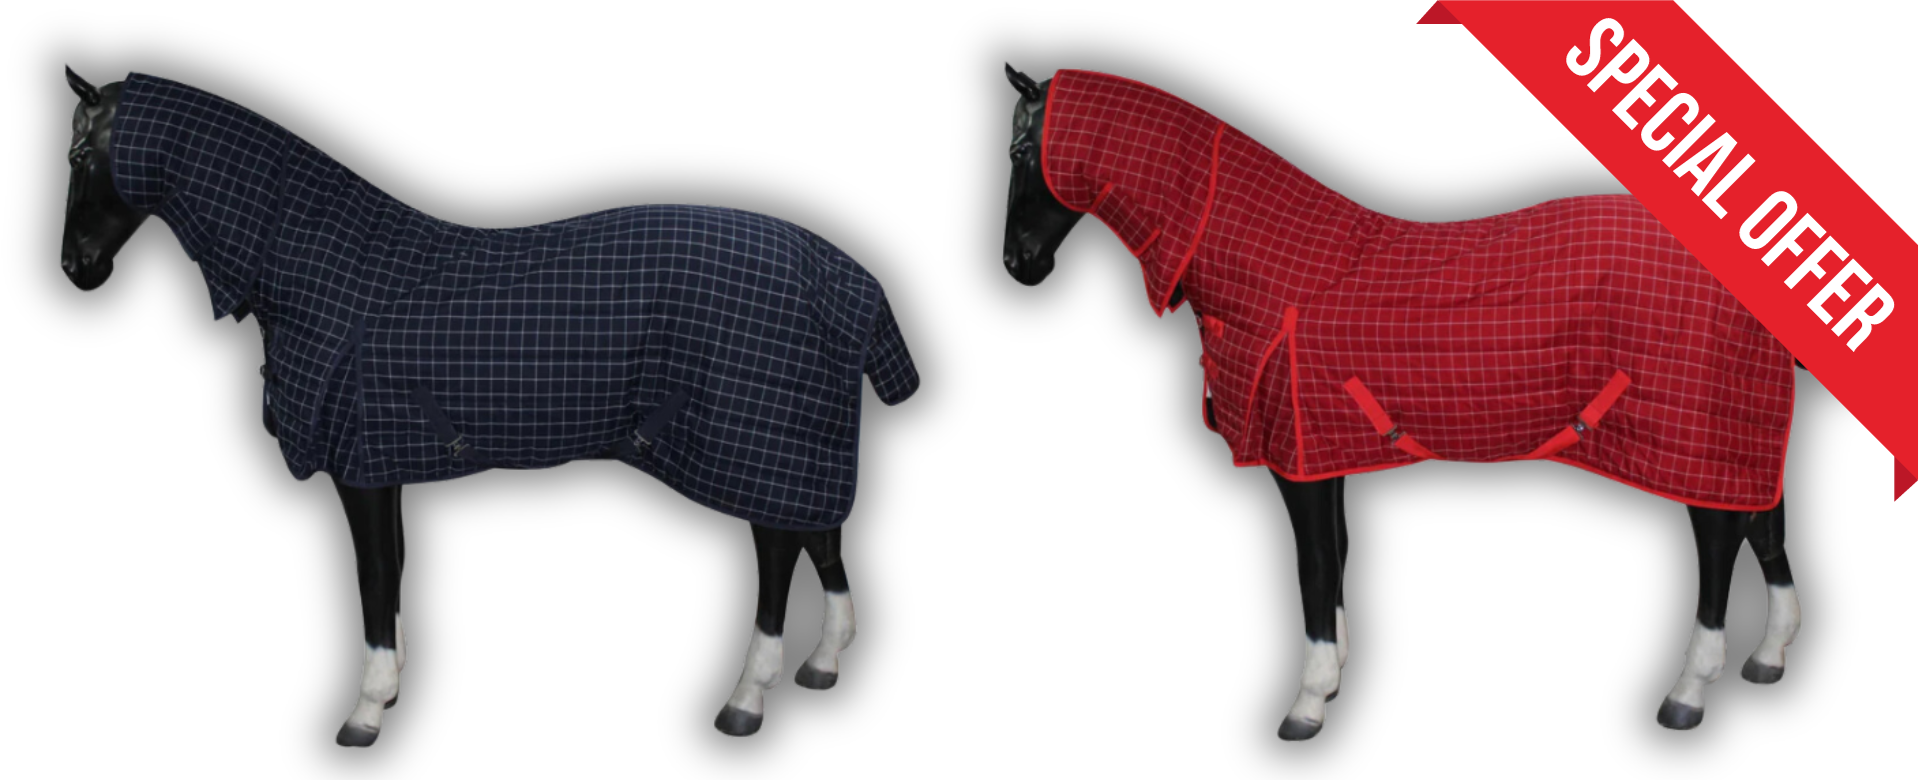 Horsemaster Stable Rug 10% OFF!